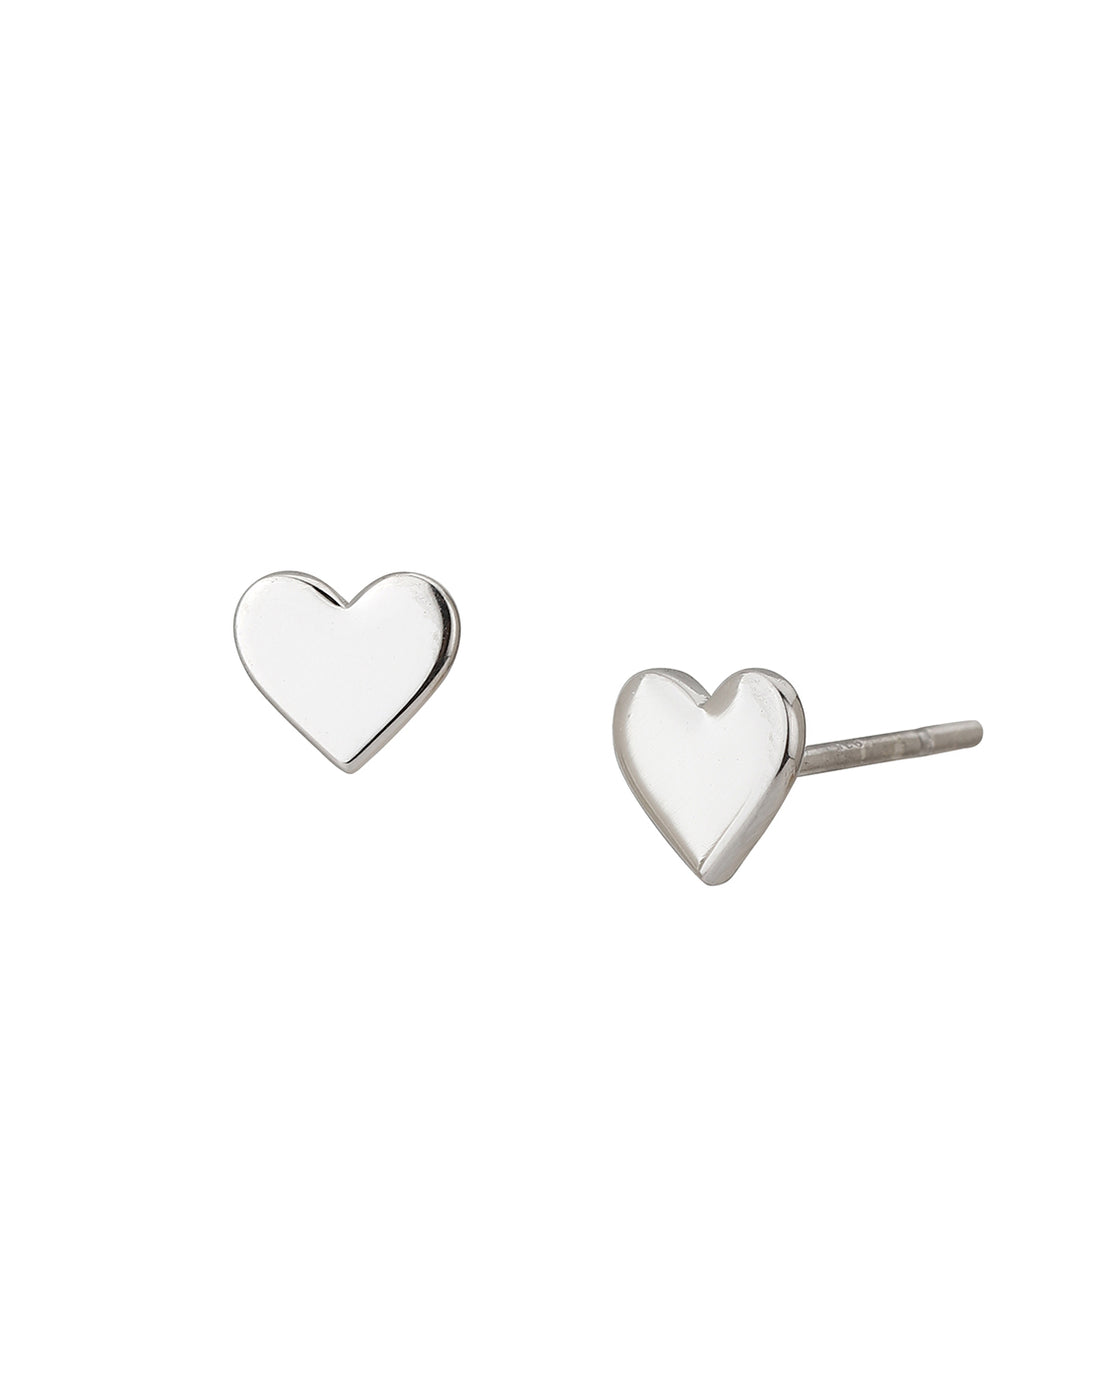 Carlton London 925 Sterling Silver Rhodium Plated Solid Heart Stud Earring For Women